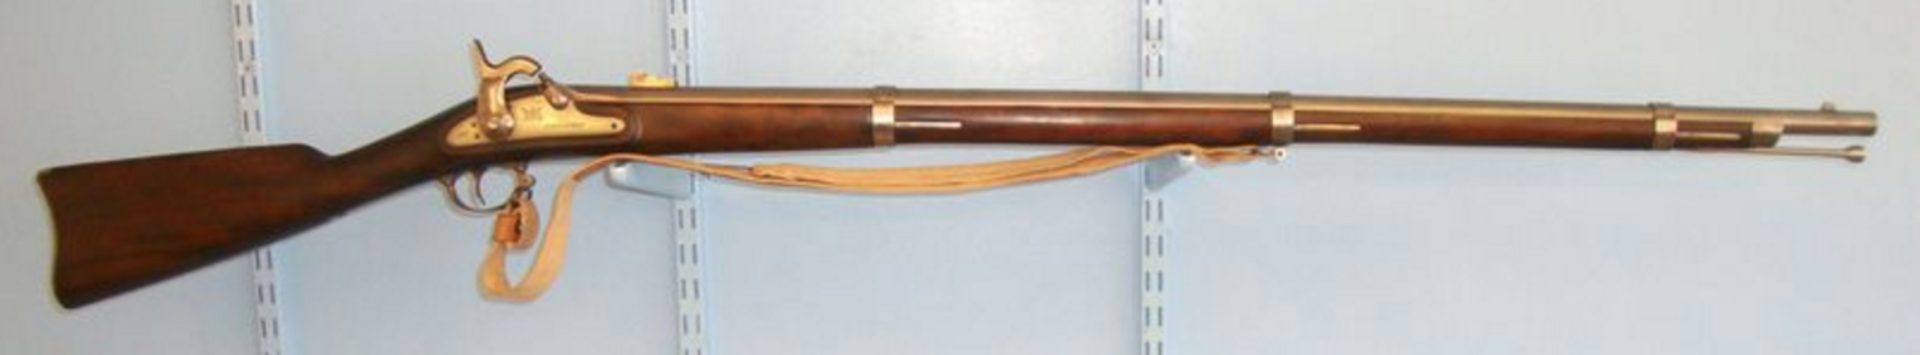 MINT, Springfield Model Of 1861 Percussion Rifle By Euro Arms Of America & Sling - Image 3 of 3